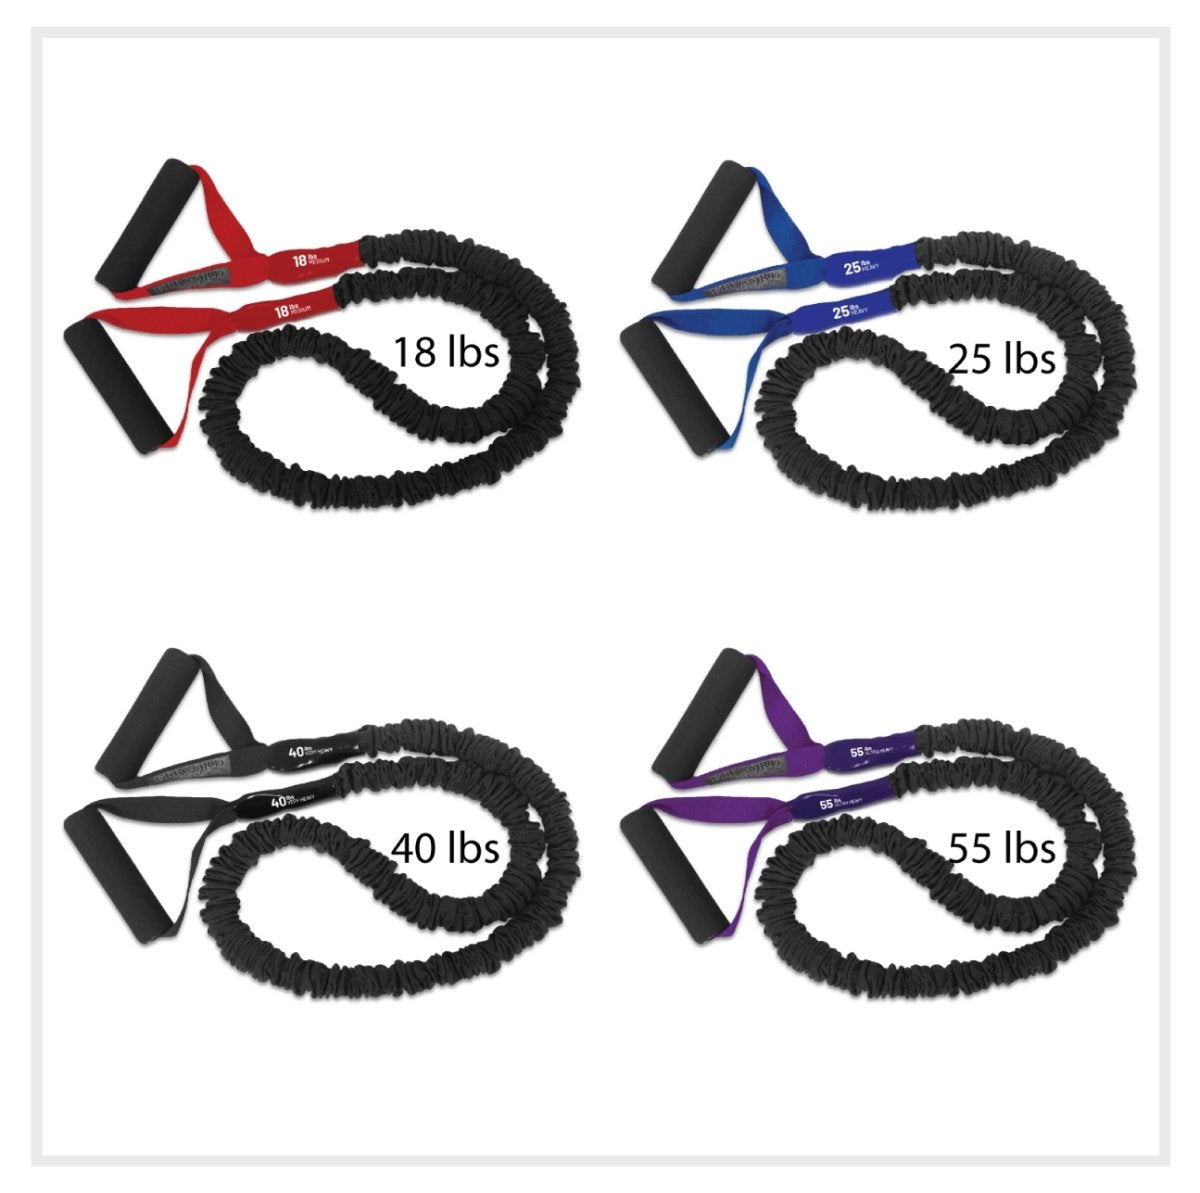 FitCord Resistance Bands 4-Pack (18lb/25lb/40lb/55lb) - FitCord Resistance Bands American made resistance bands with padded handles for building muscle through exercise that require tension . Heavy duty and heavy resistance